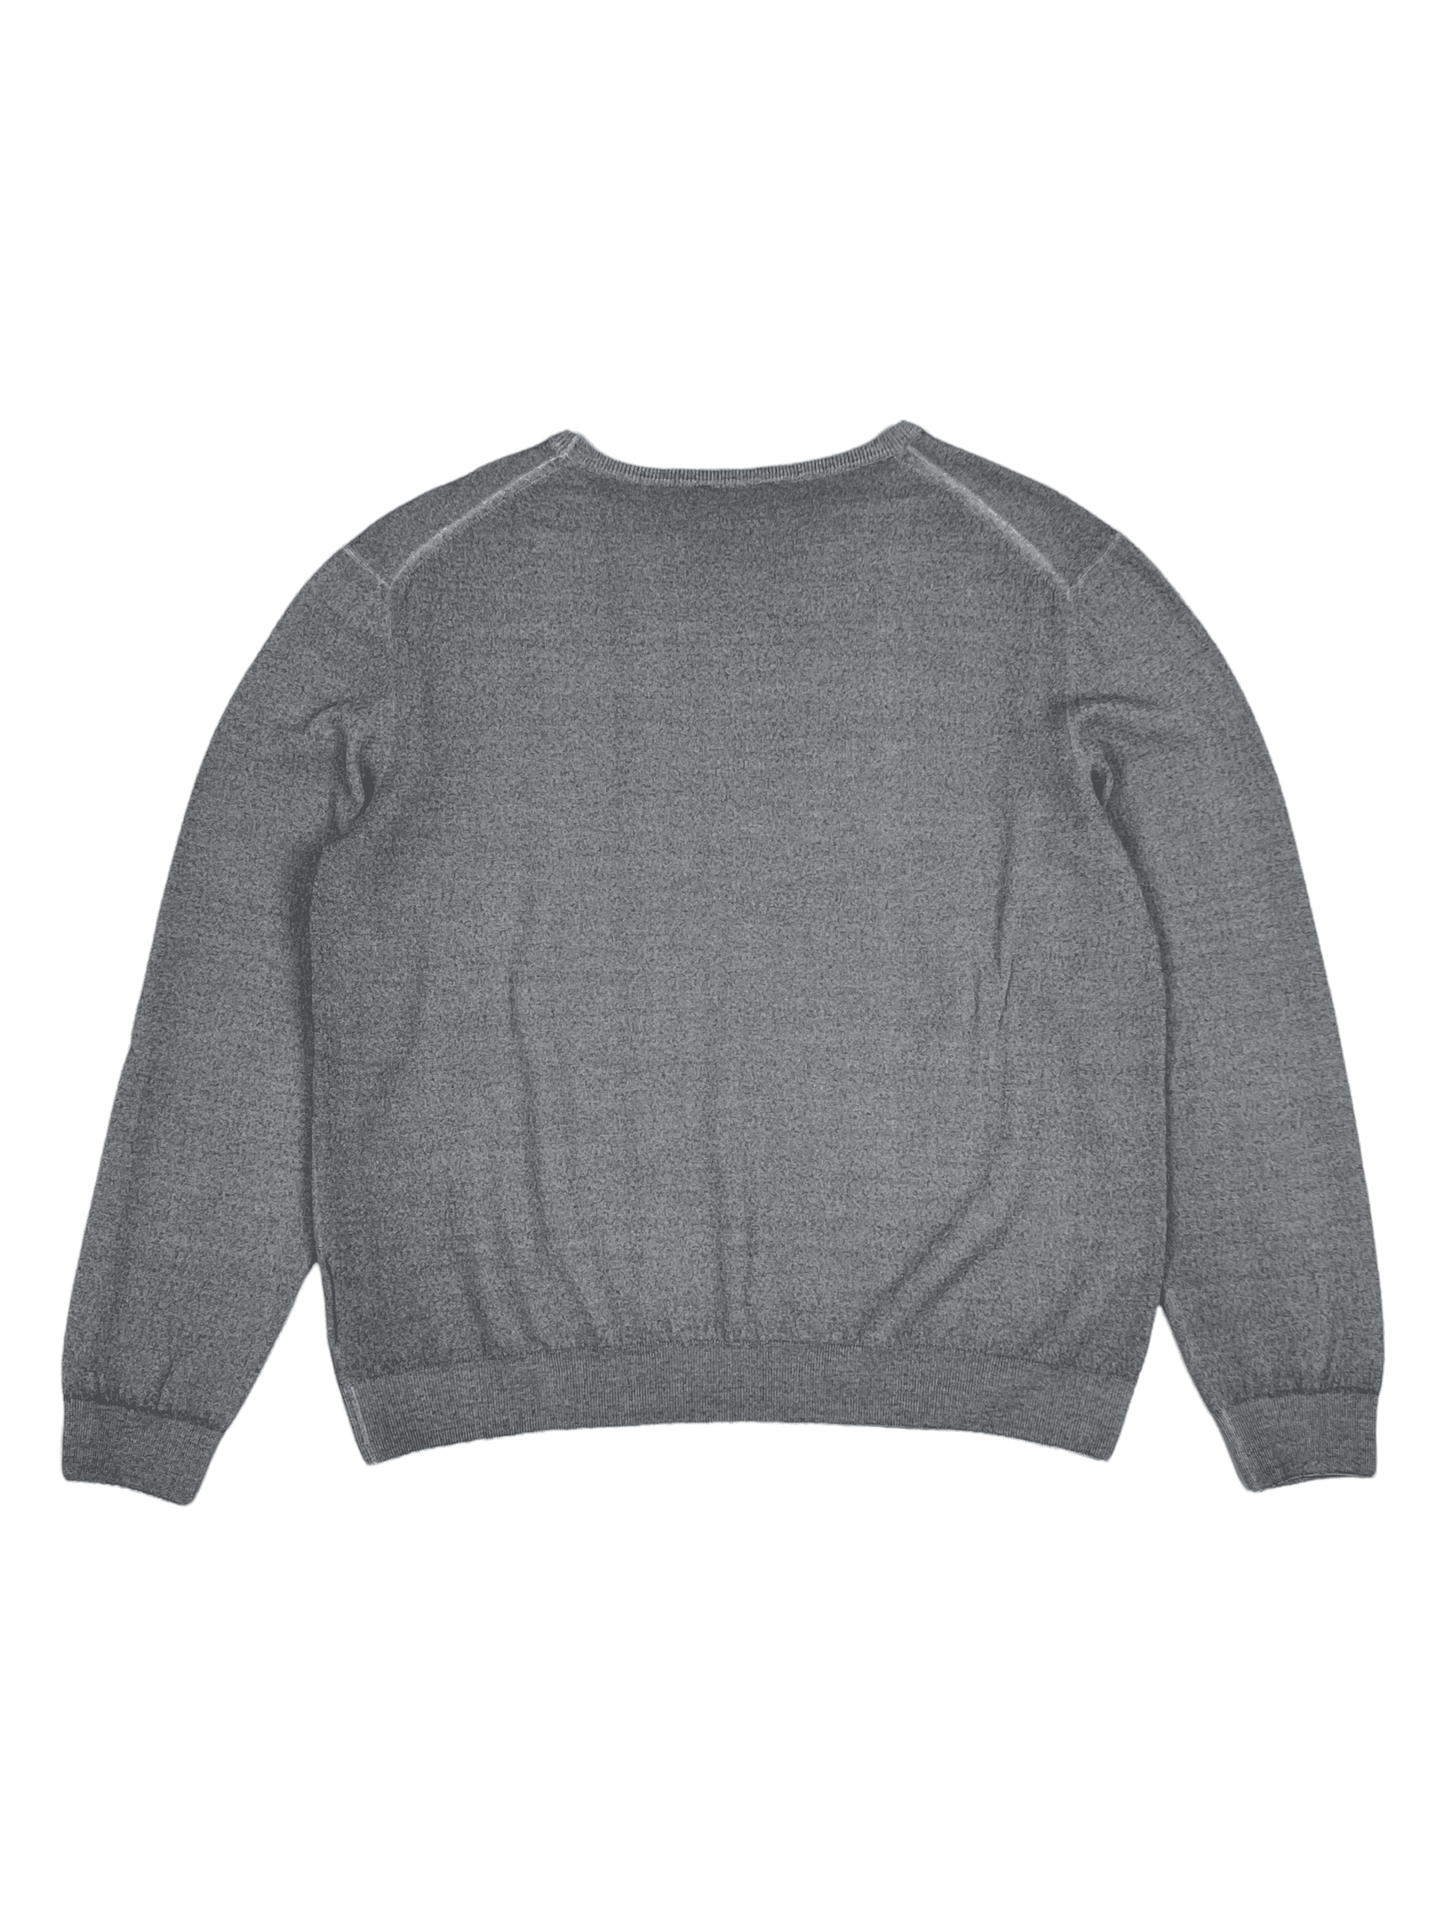 Paul Zileri Grey Wool Crewneck Sweater Small - Genuine Design Luxury Consignment for Men. New & Pre-Owned Clothing, Shoes, & Accessories. Calgary, Canada